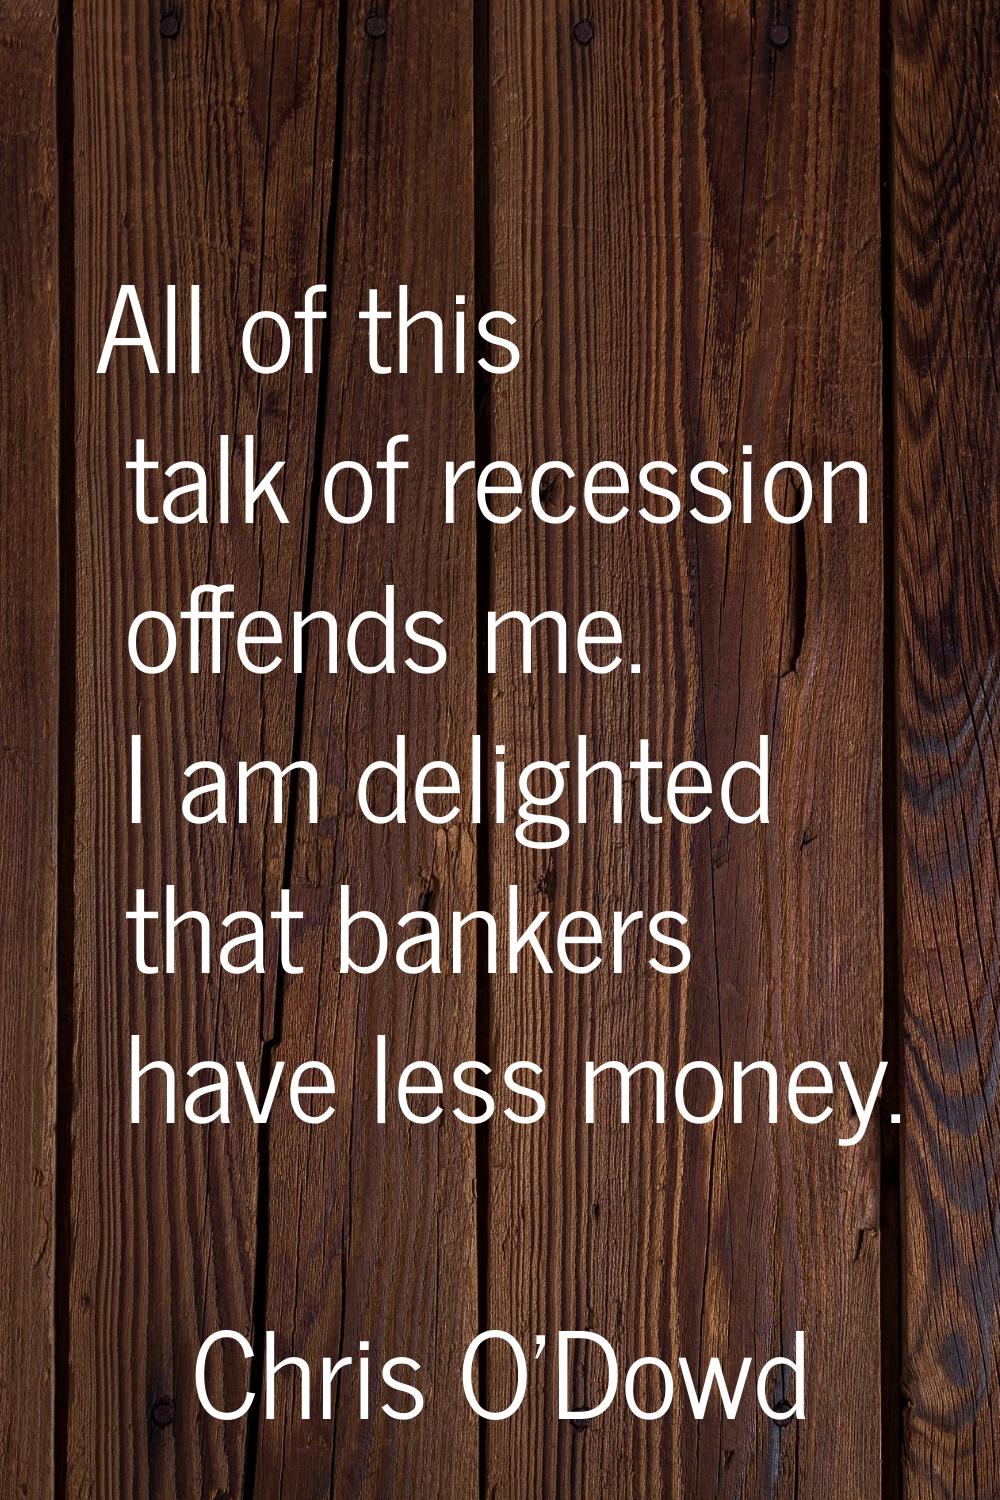 All of this talk of recession offends me. I am delighted that bankers have less money.